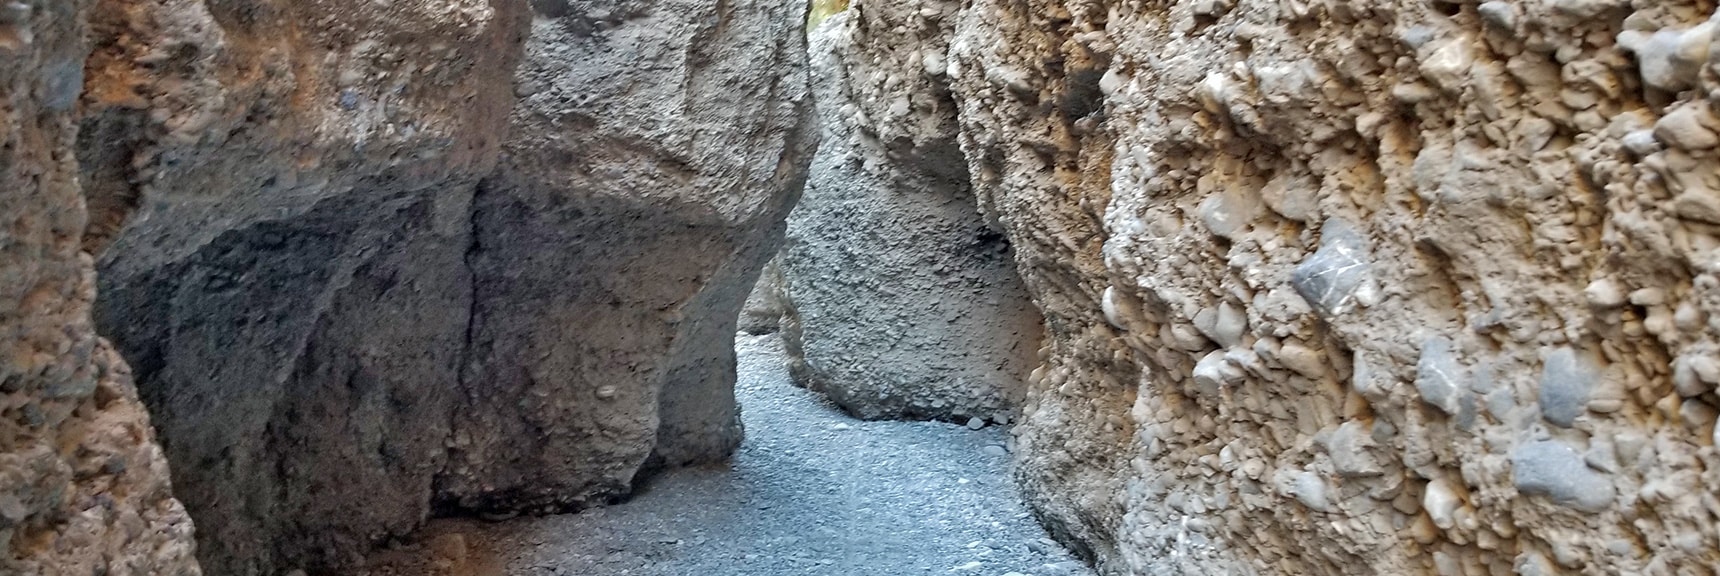 Narrow Portion of the Slot Canyon with Base Wider Than Top | Harris Springs Canyon | Biking from Centennial Hills | Spring Mountains, Nevada